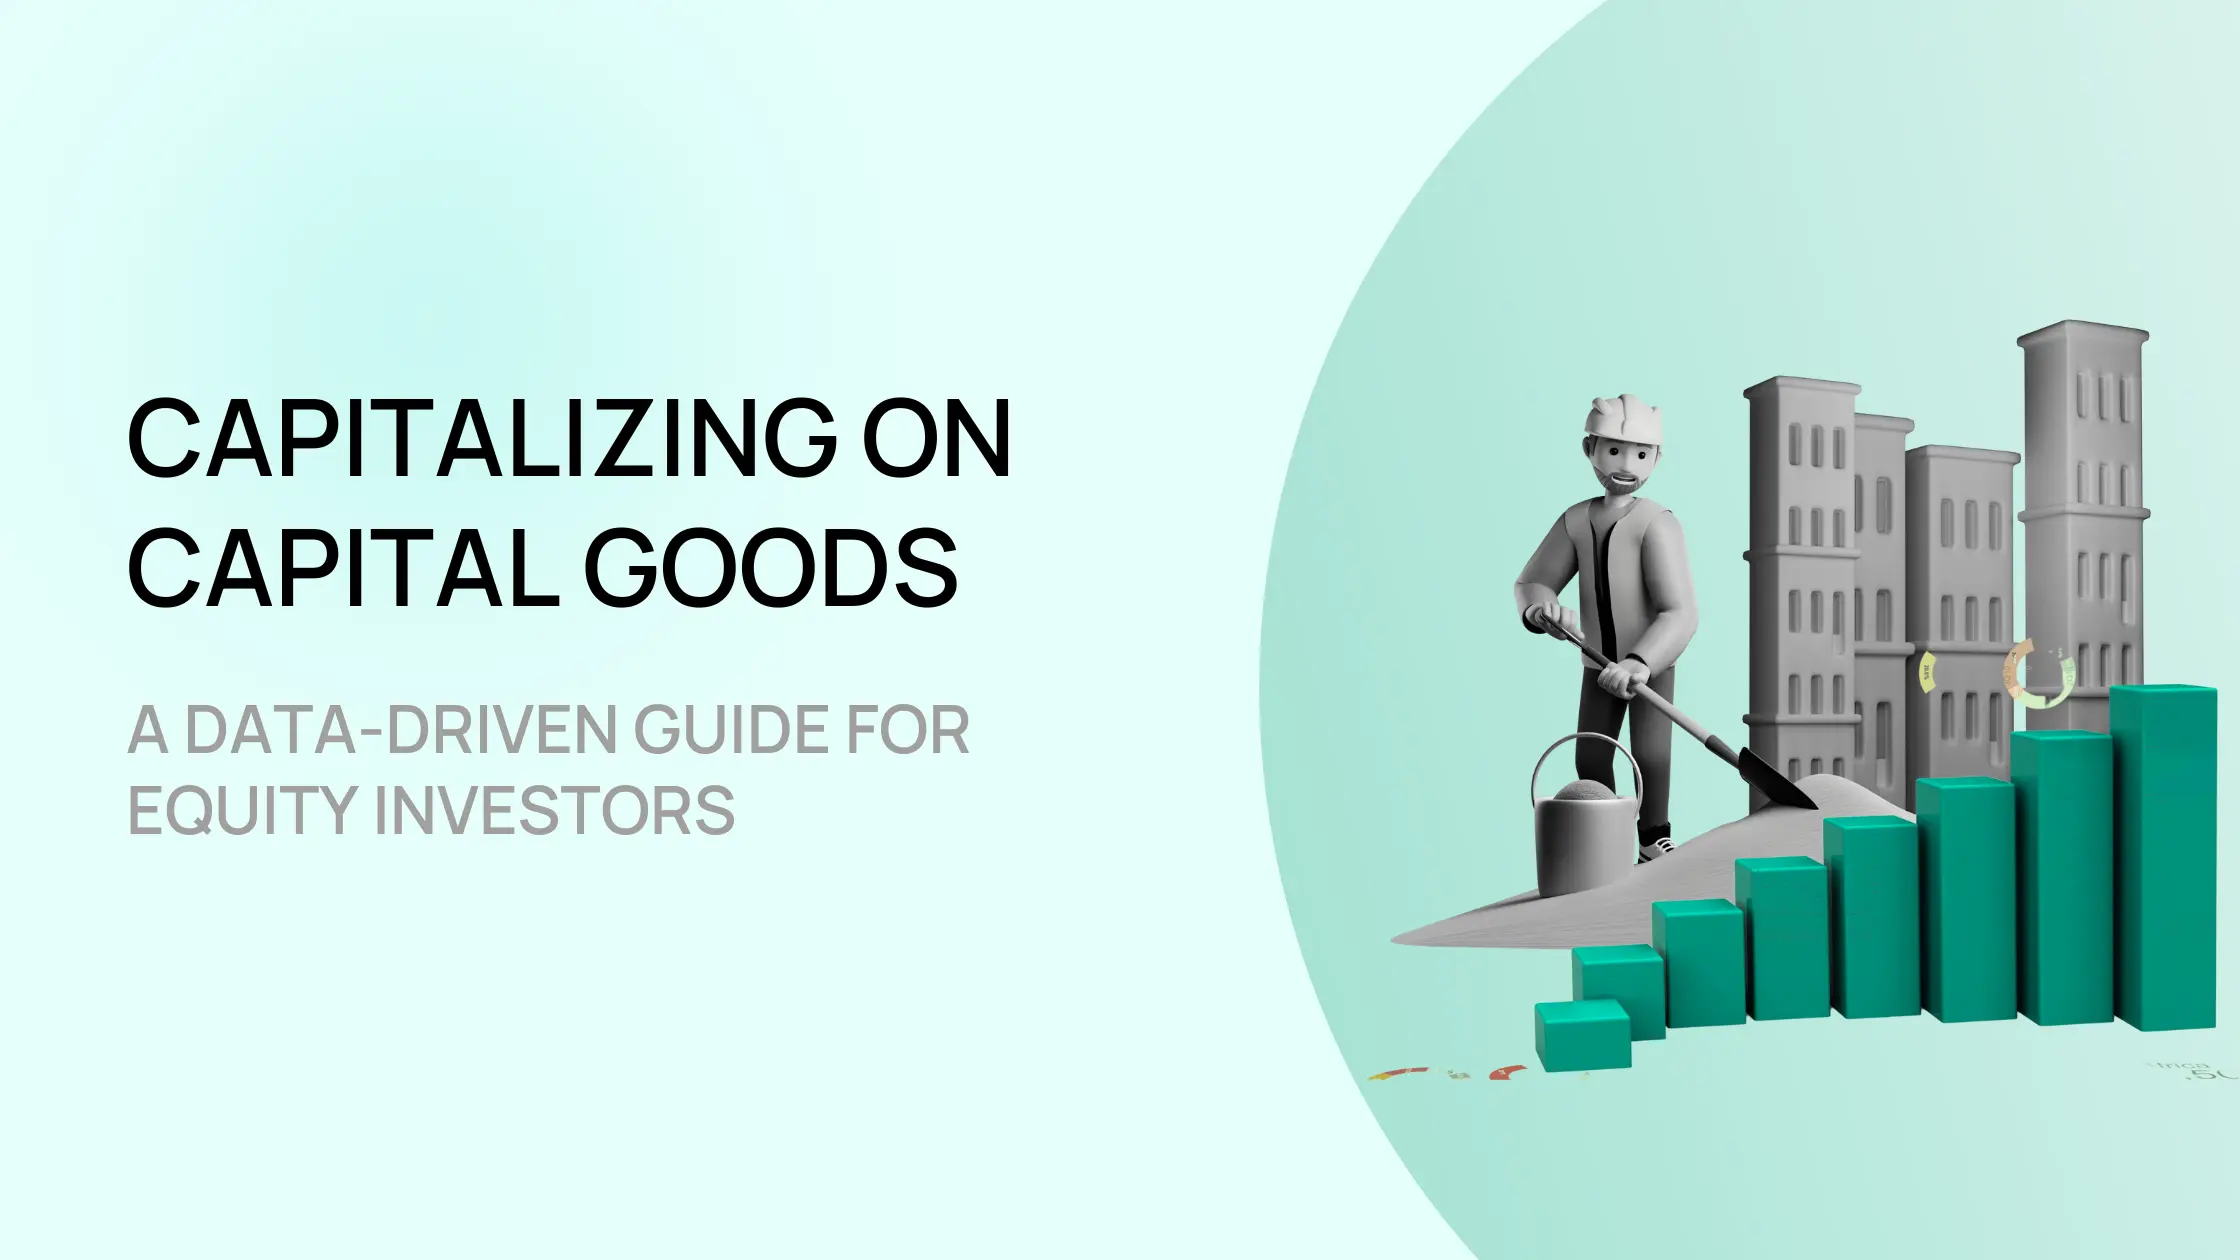 Capitalizing on Capital Goods: A Data-Driven Guide for Equity Investors